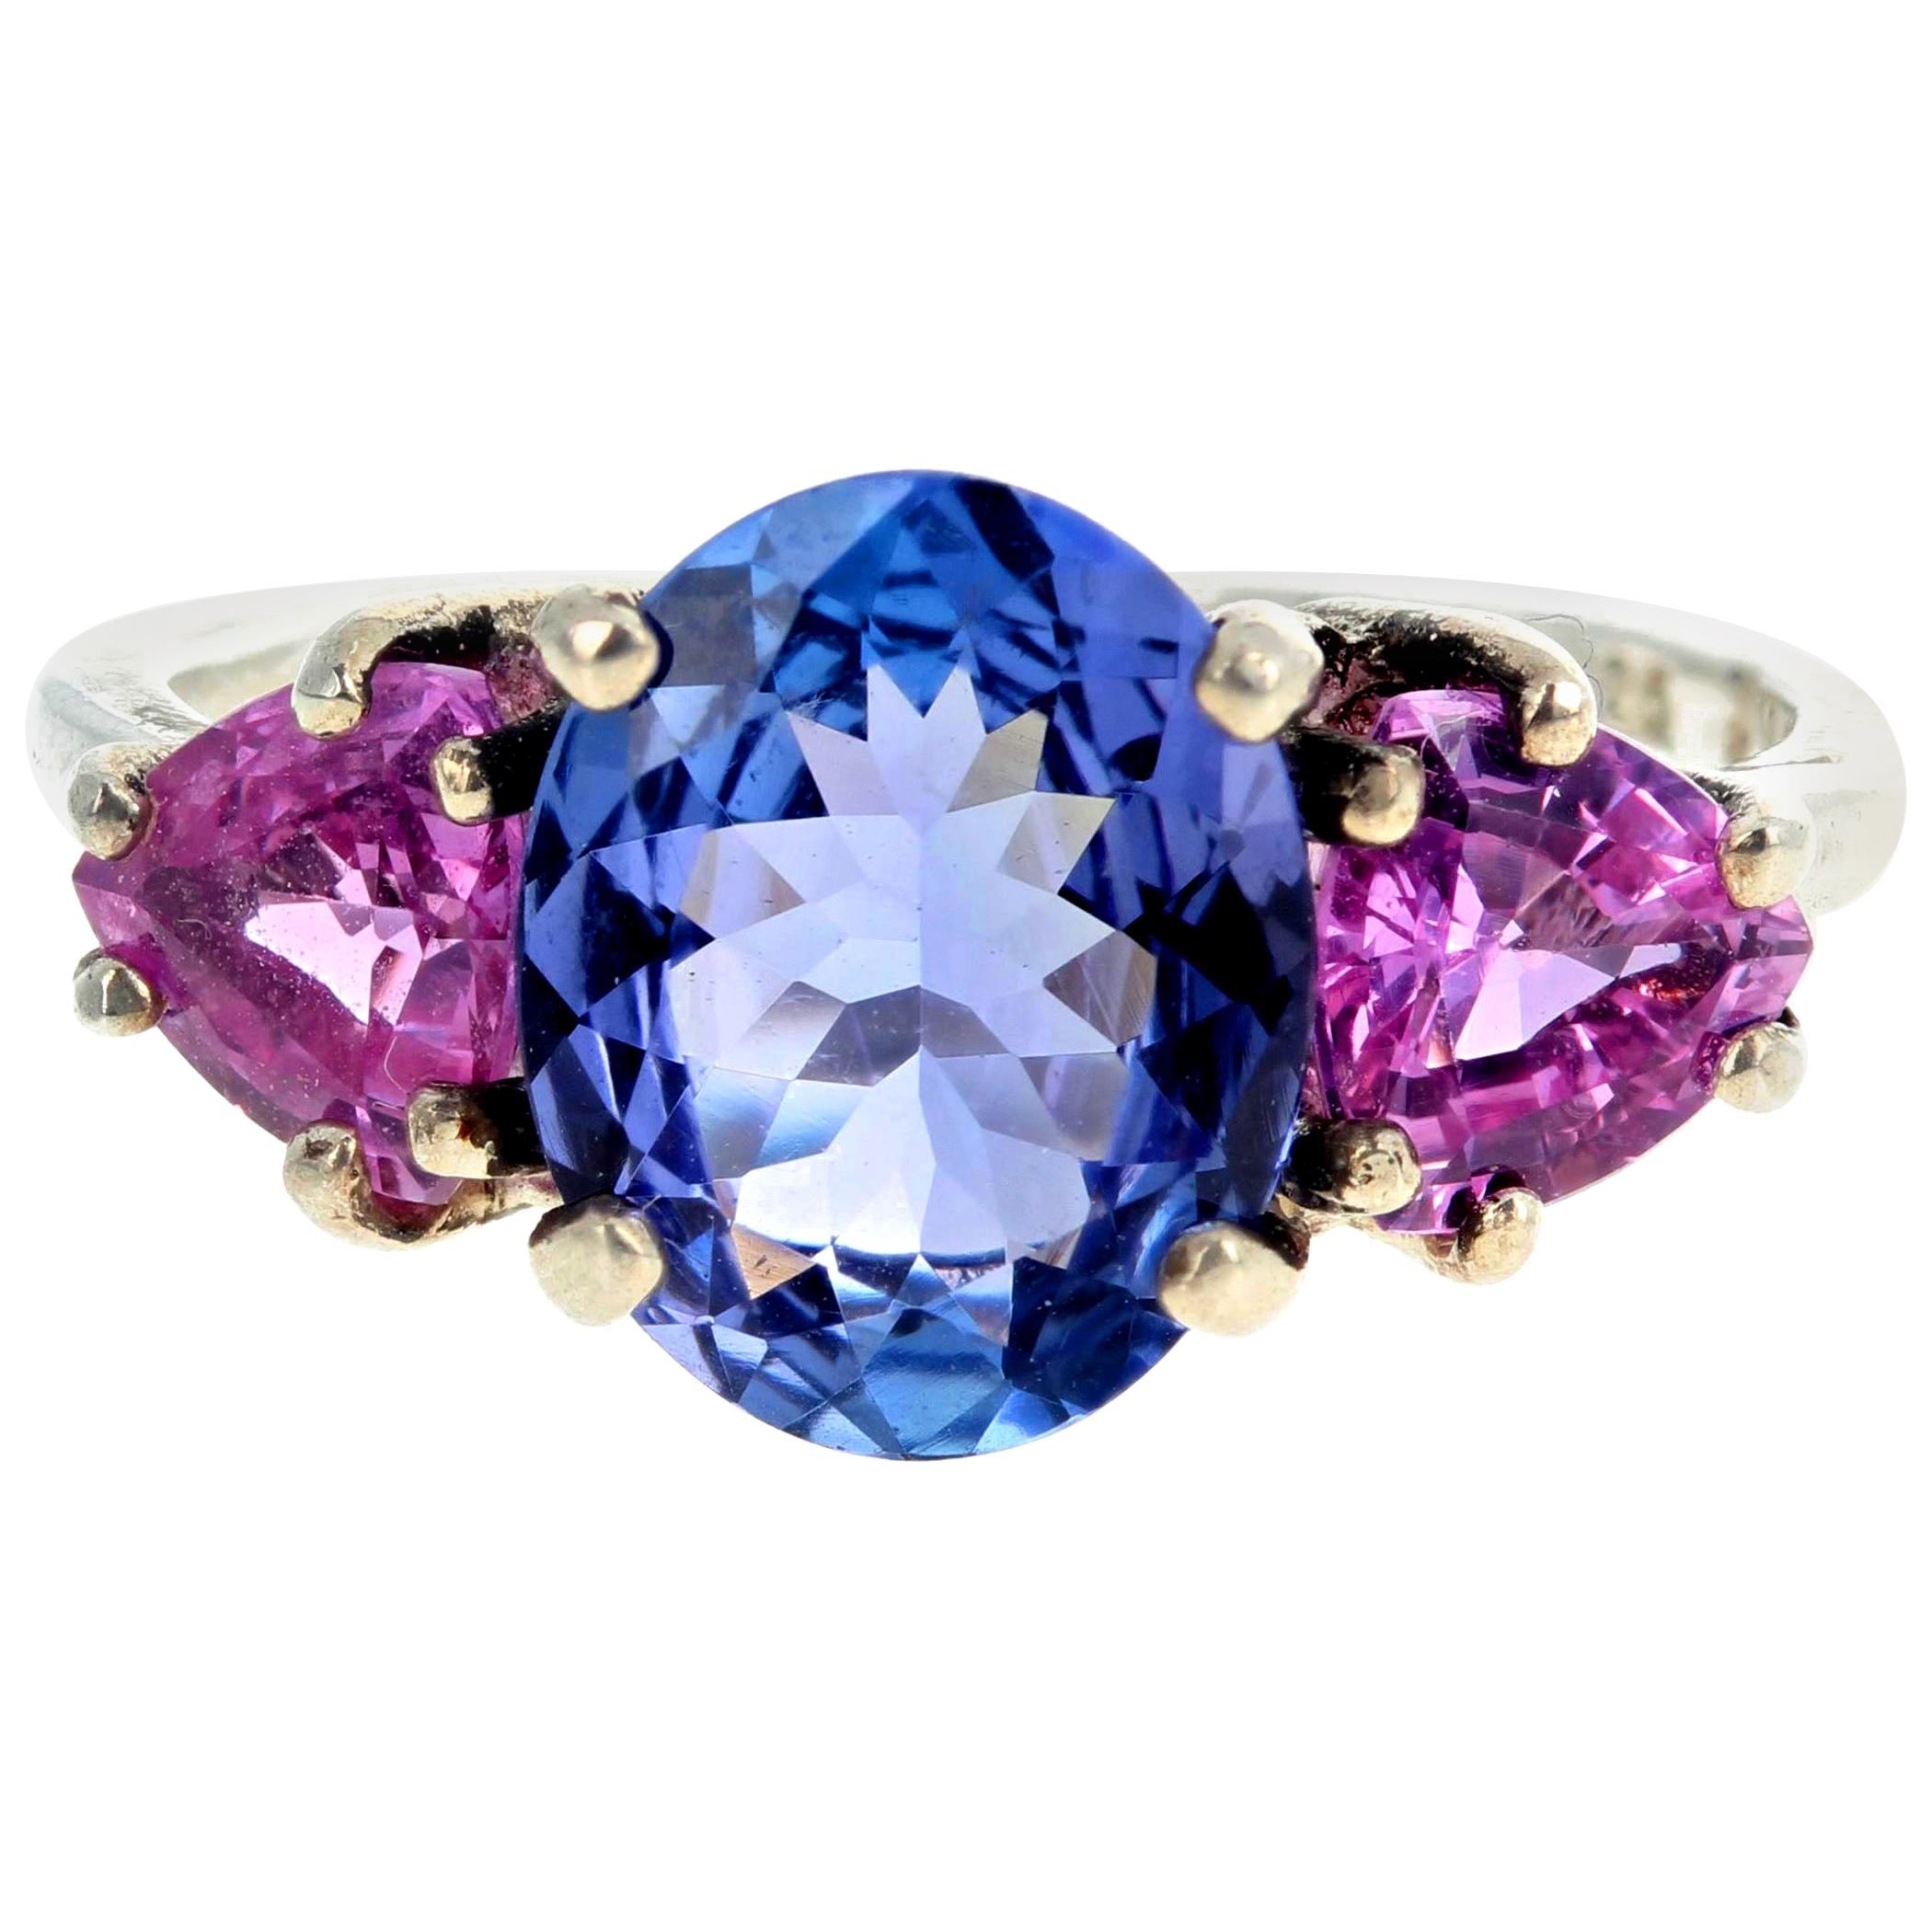 AJD Elegant Exquisite 2.15Ct Tanzanite & Real Pink Sapphire Sterling Silver Ring